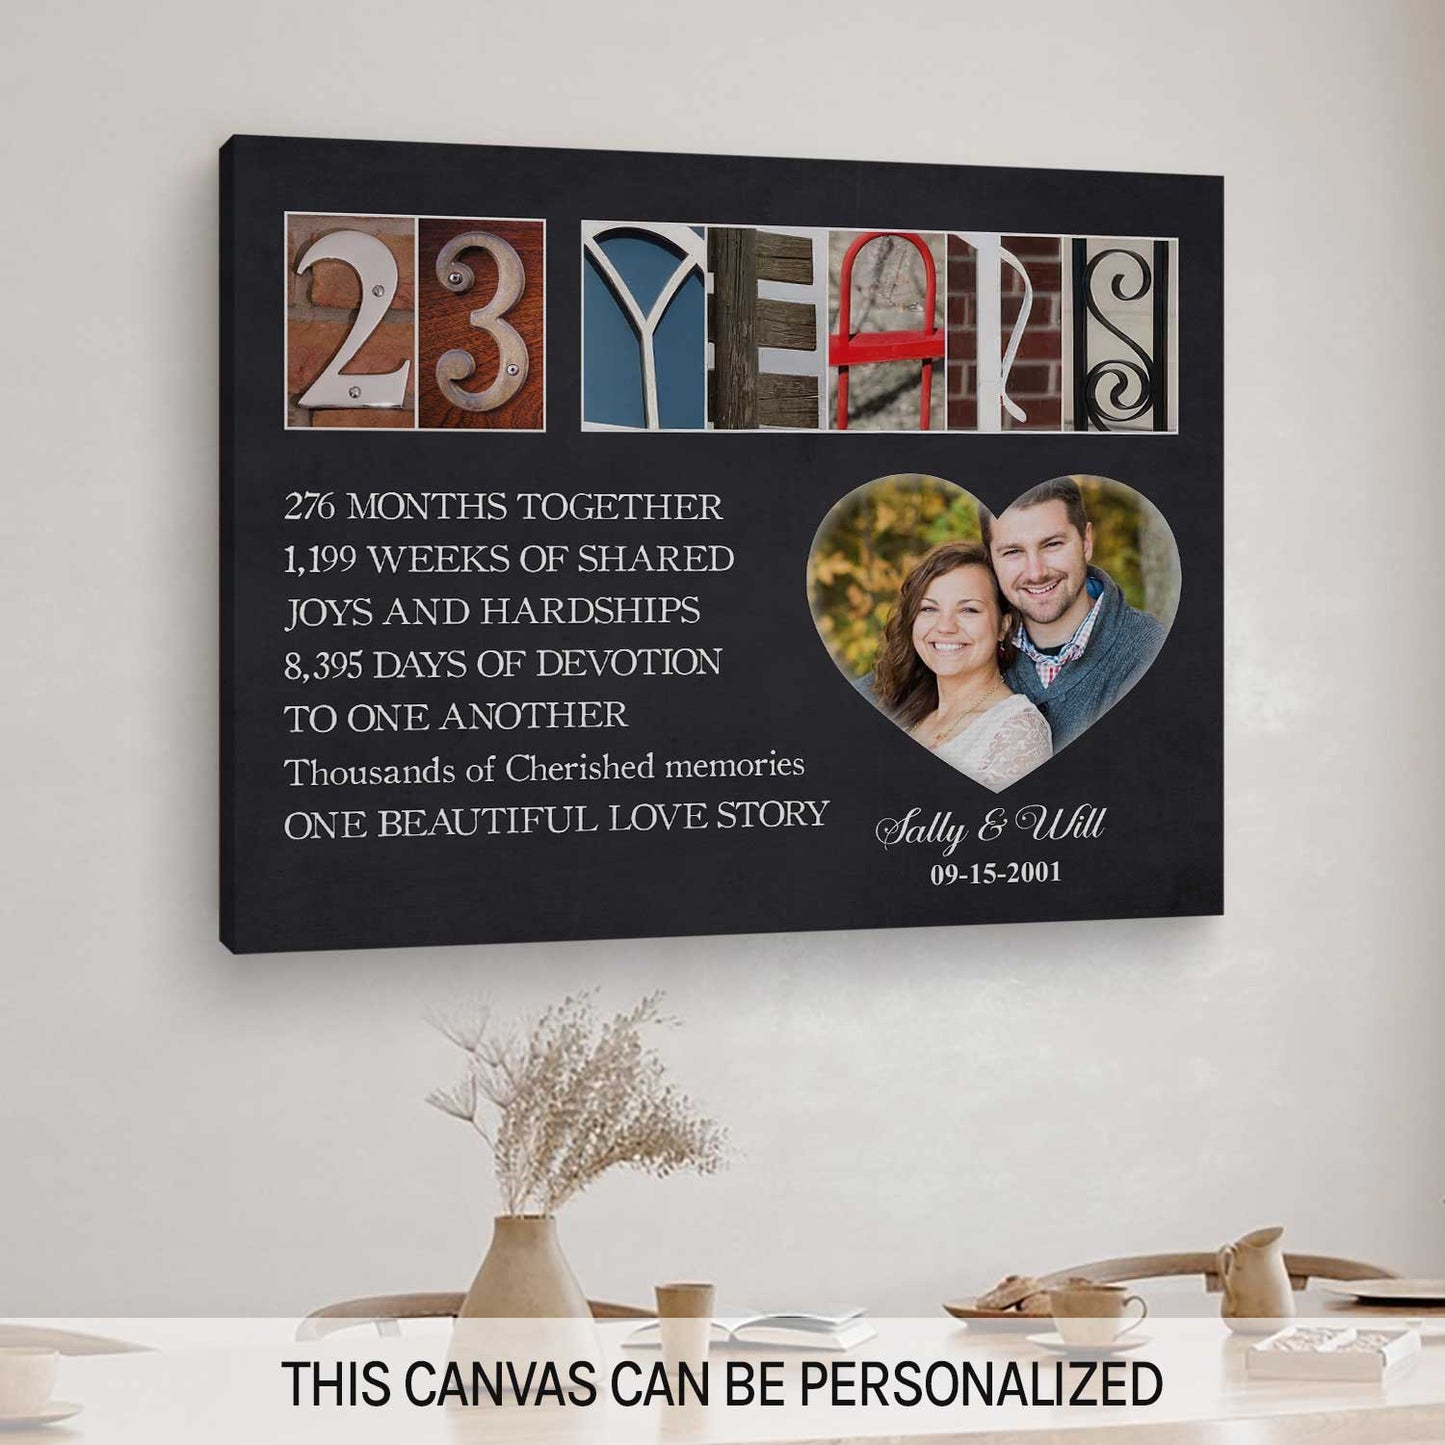 23 Years - Personalized 23 Year Anniversary gift For Parents - Custom Canvas Print - MyMindfulGifts